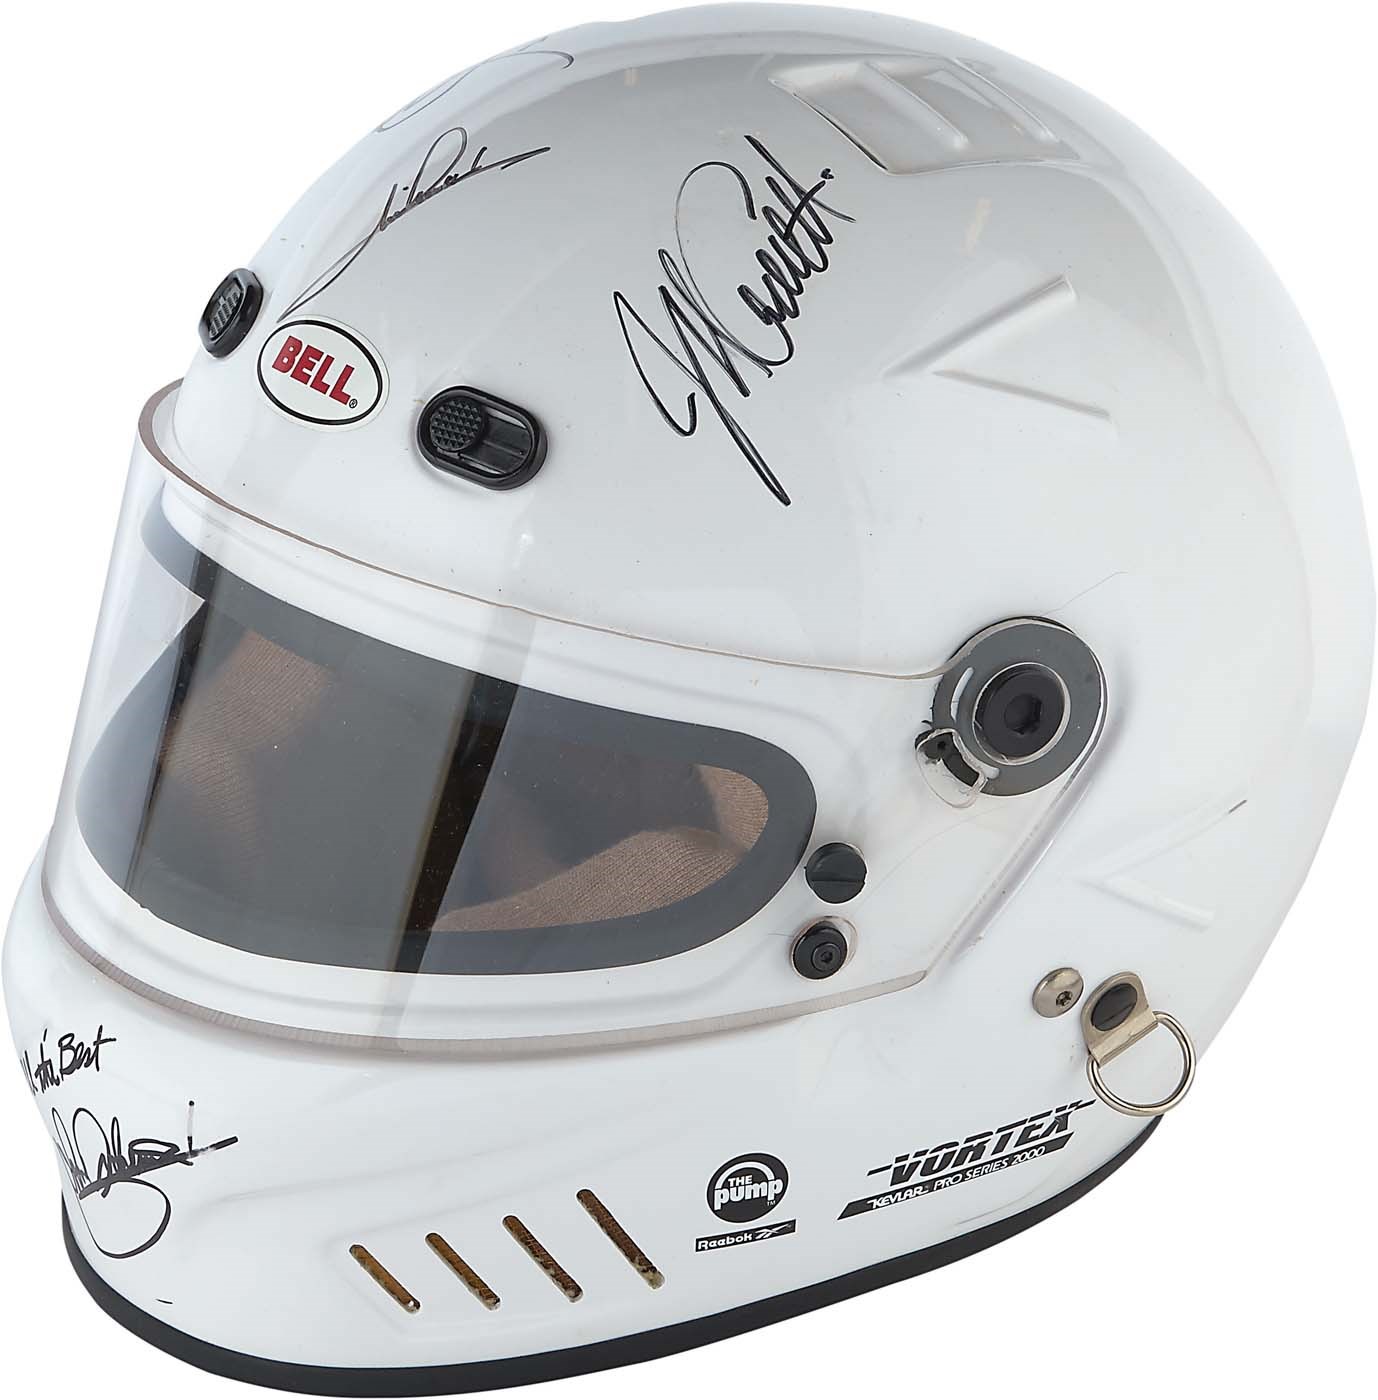 Jim Thome Master Collection - Andretti Family Signed Helmet